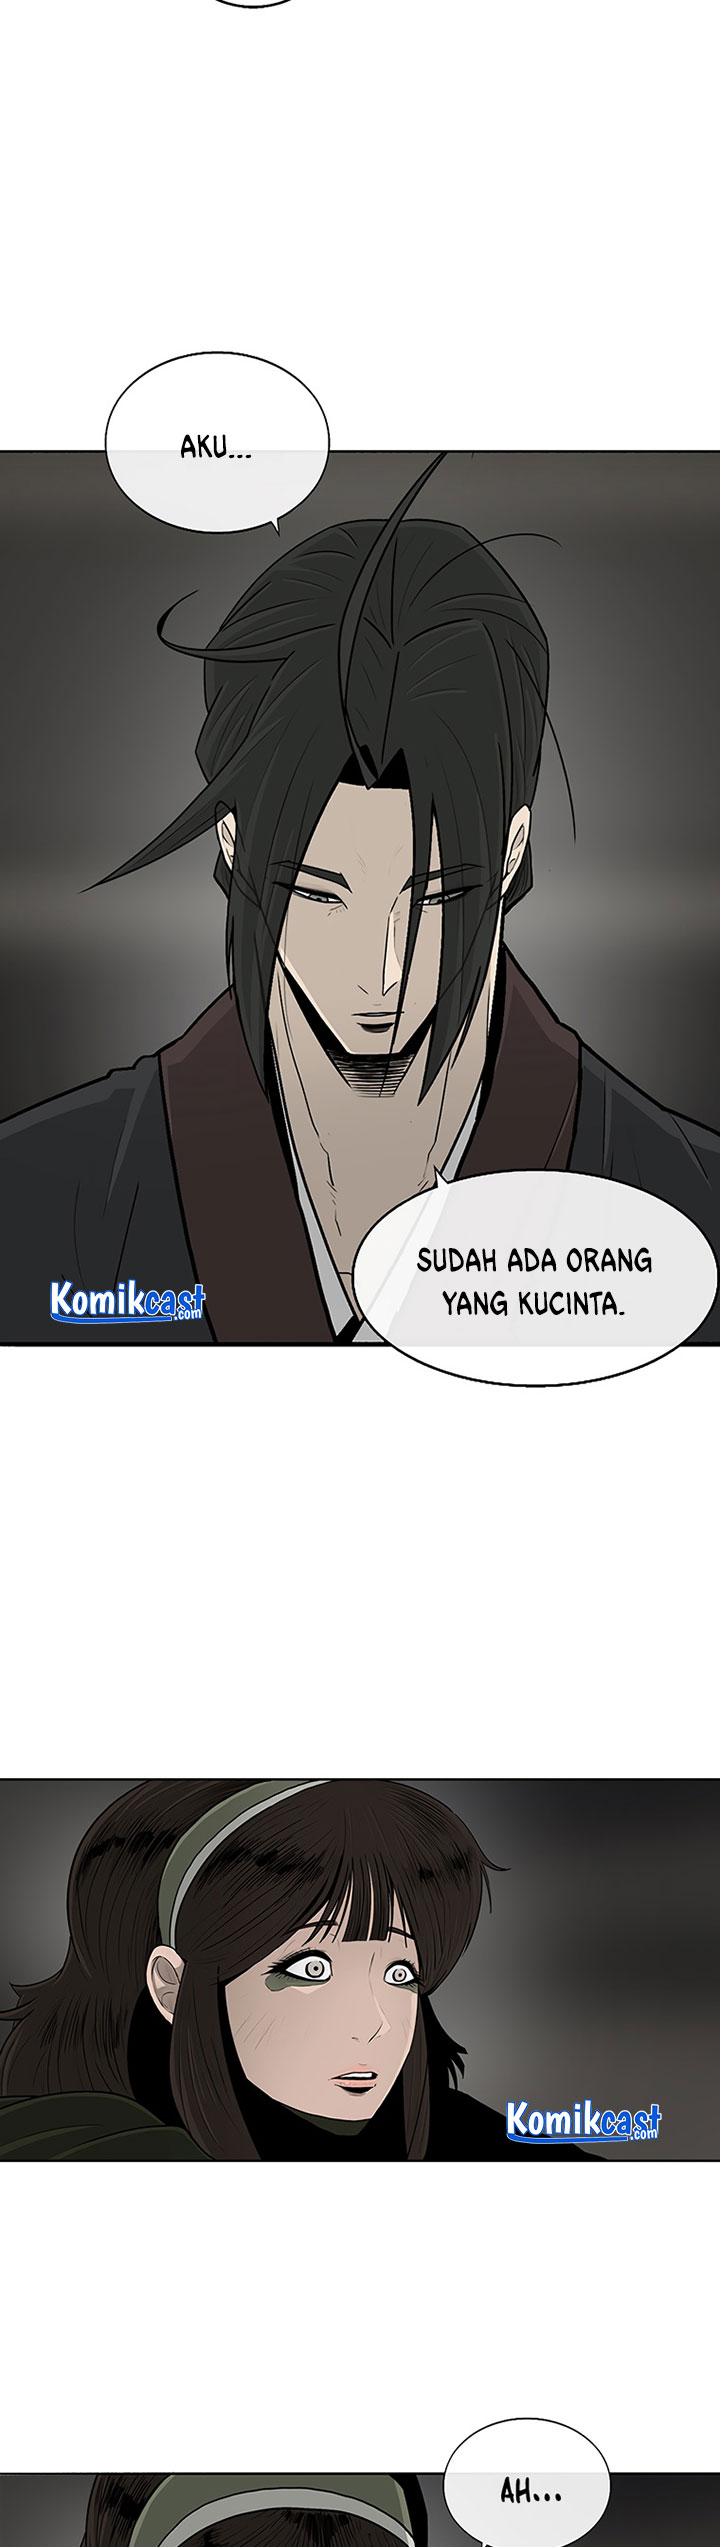 Legend Of The Northern Blade Chapter 96